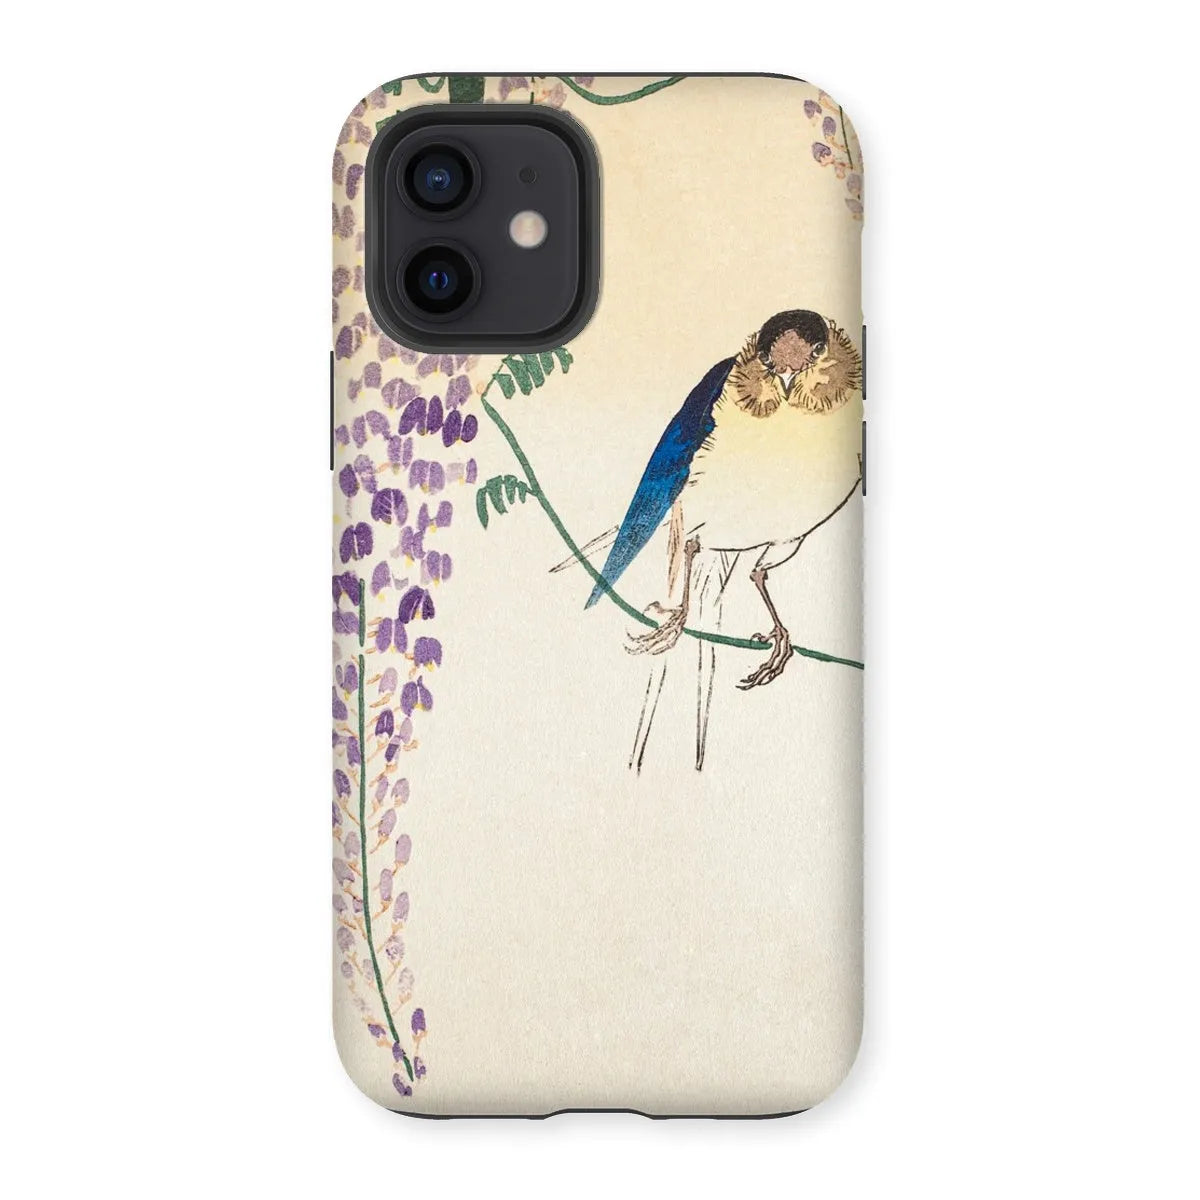 Wisteria And Swallow - Japanese Art Phone Case - Ohara Koson - Iphone 12 / Matte - Mobile Phone Cases - Aesthetic Art